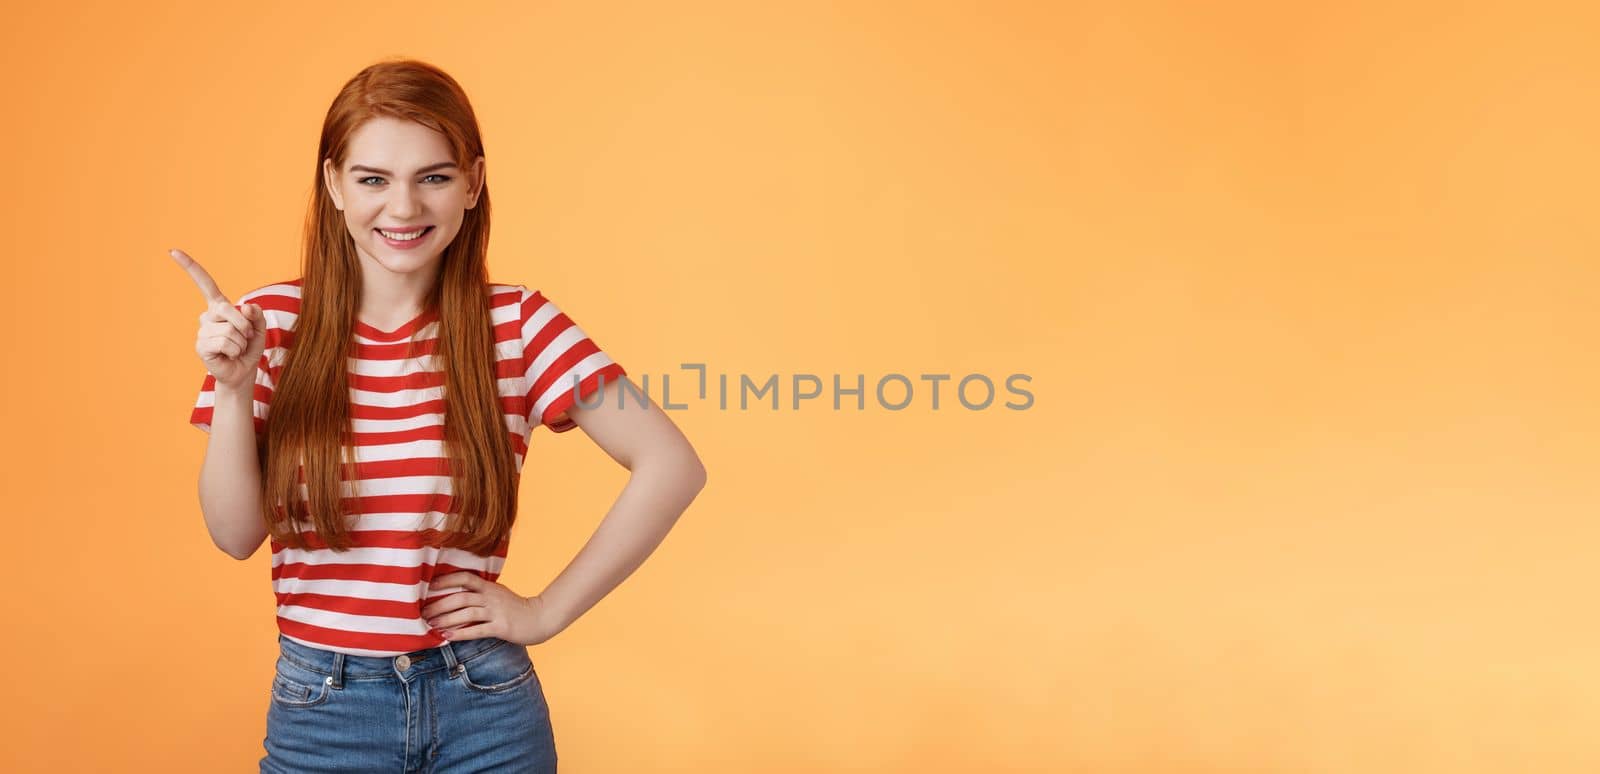 Cheerful sly redhead girlfriend have something interesting on mind, squinting cunning joyful smile, hold hand waist confident pose, pointing upper left corner give recommendation, orange background.